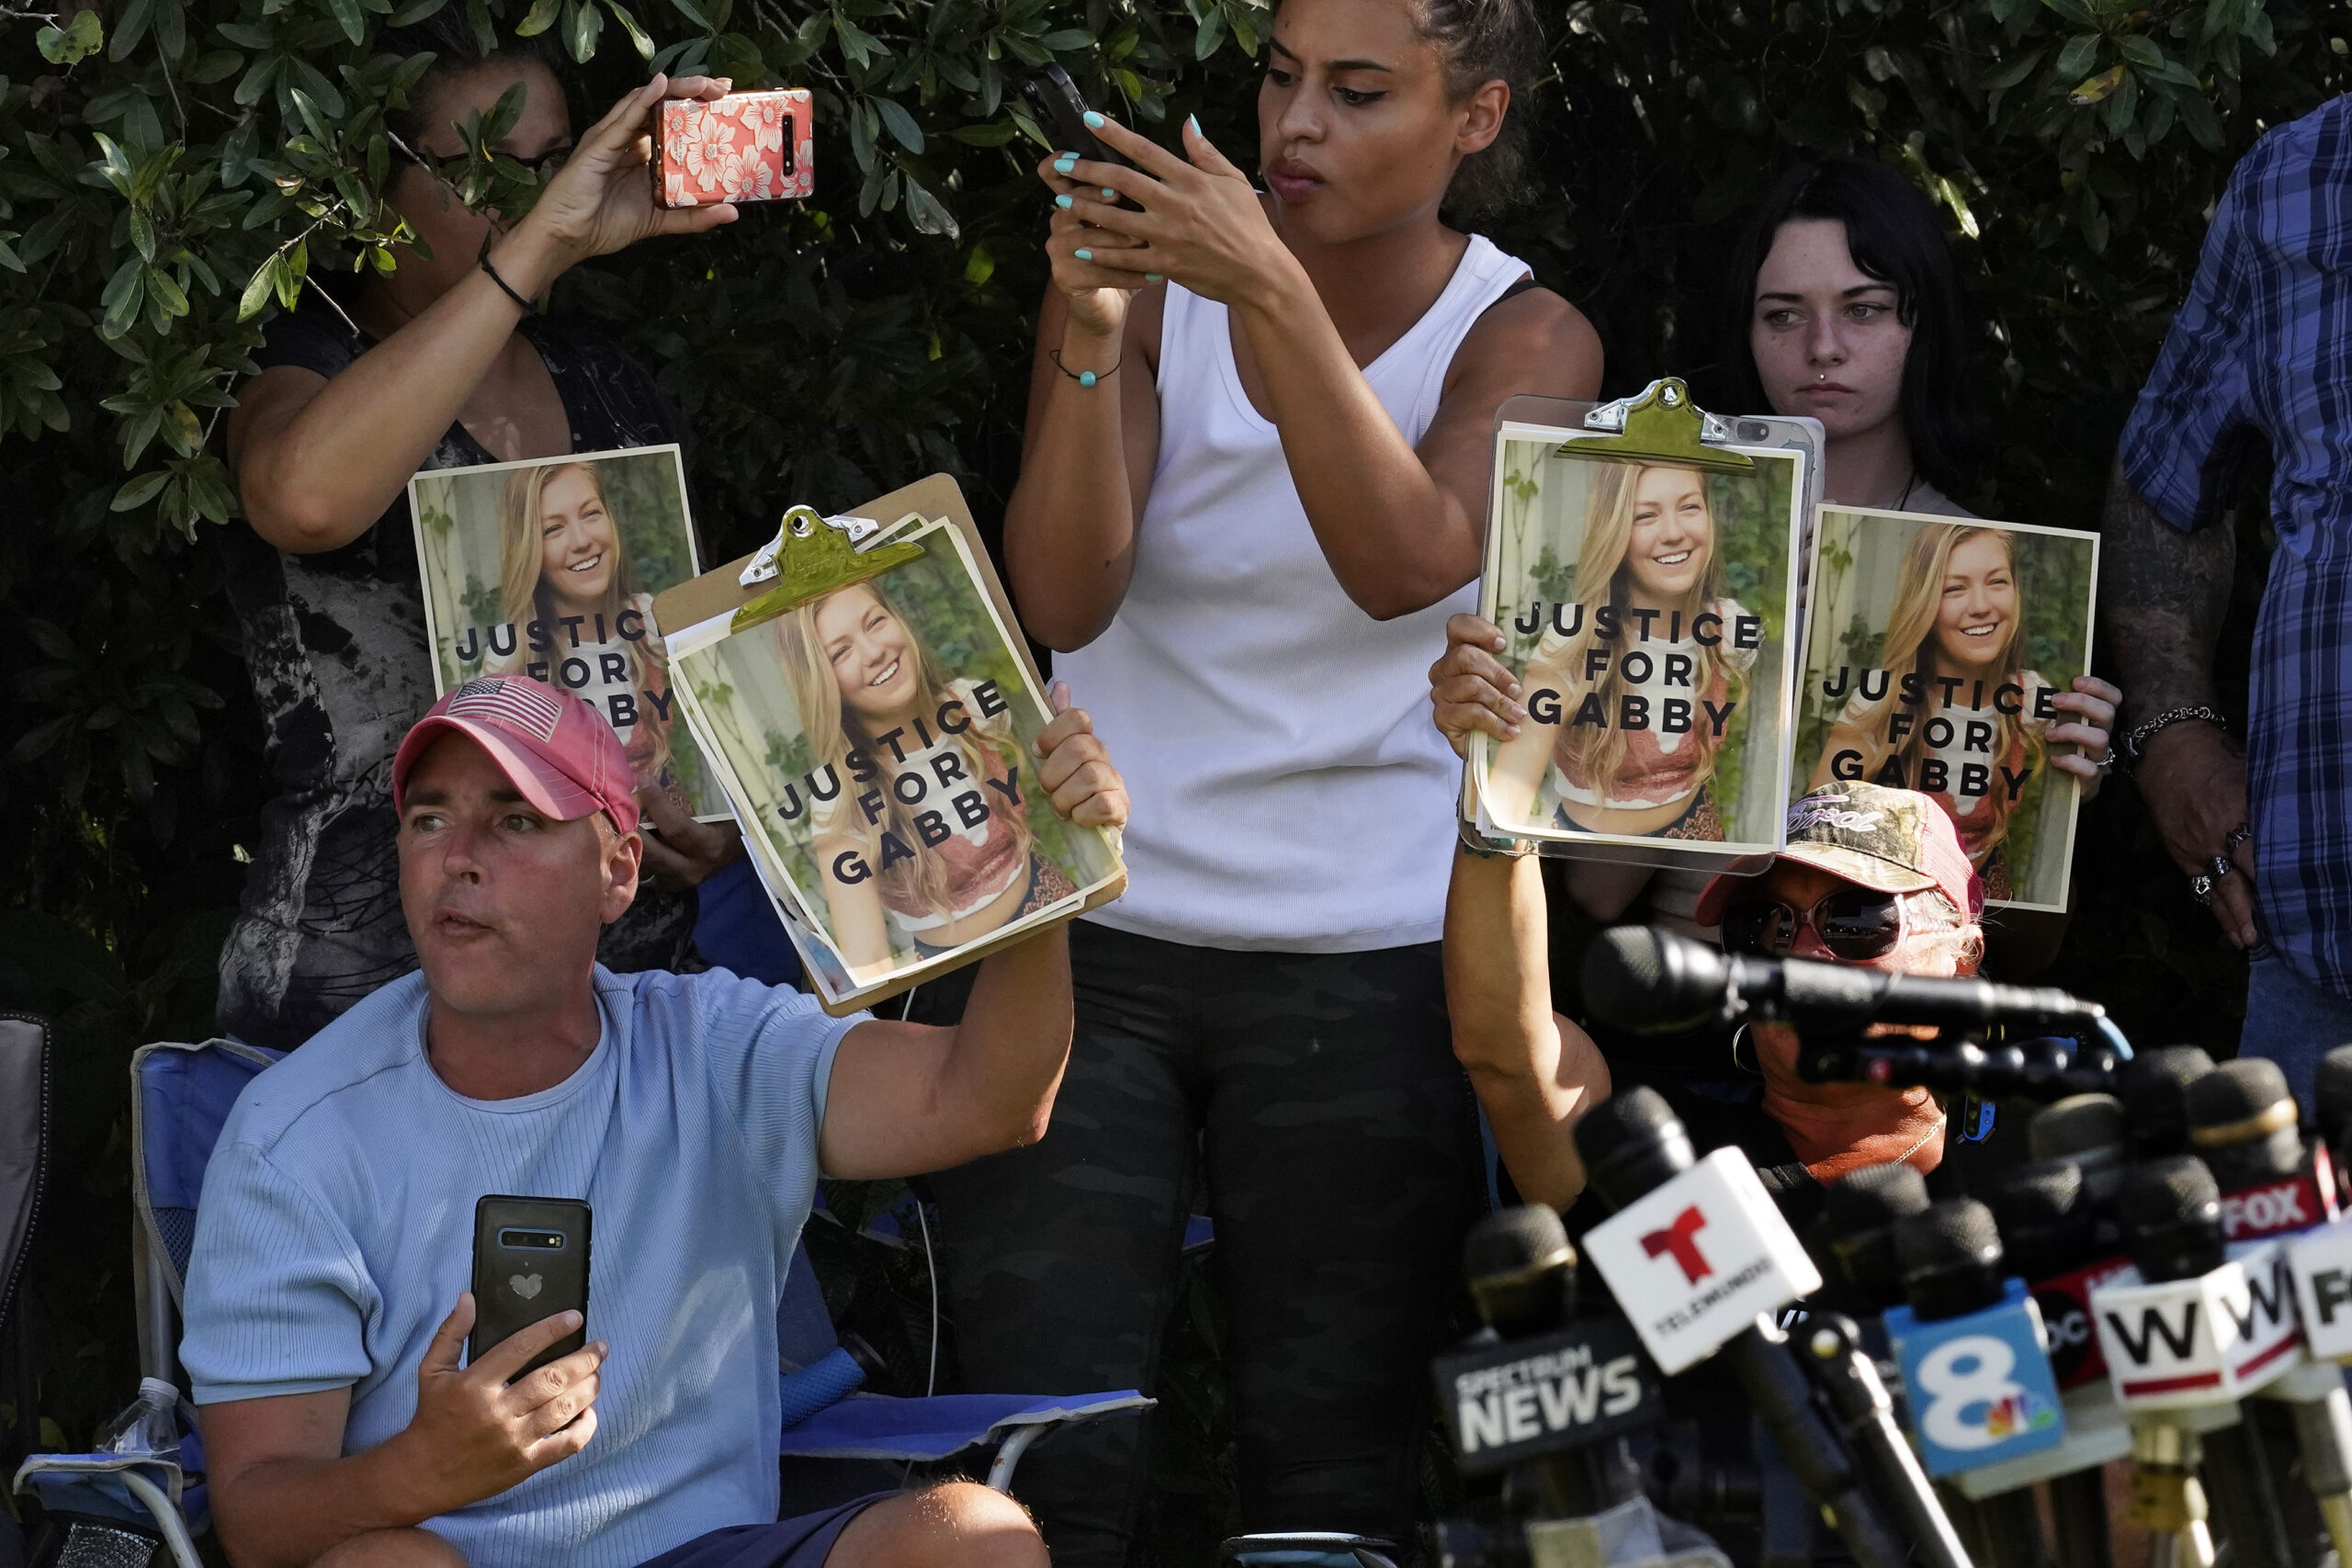 Supporters of Gabby Petito hold up photos of Gabby after a news conference Wednesday, Oct. 20, 2021, in North Port, Fla. Items believed to belong to Brian Laundrie and potential human remains were found in a Florida wilderness park during a search for clues in the slaying of Gabby Petito . (AP Photo/Chris O'Meara)